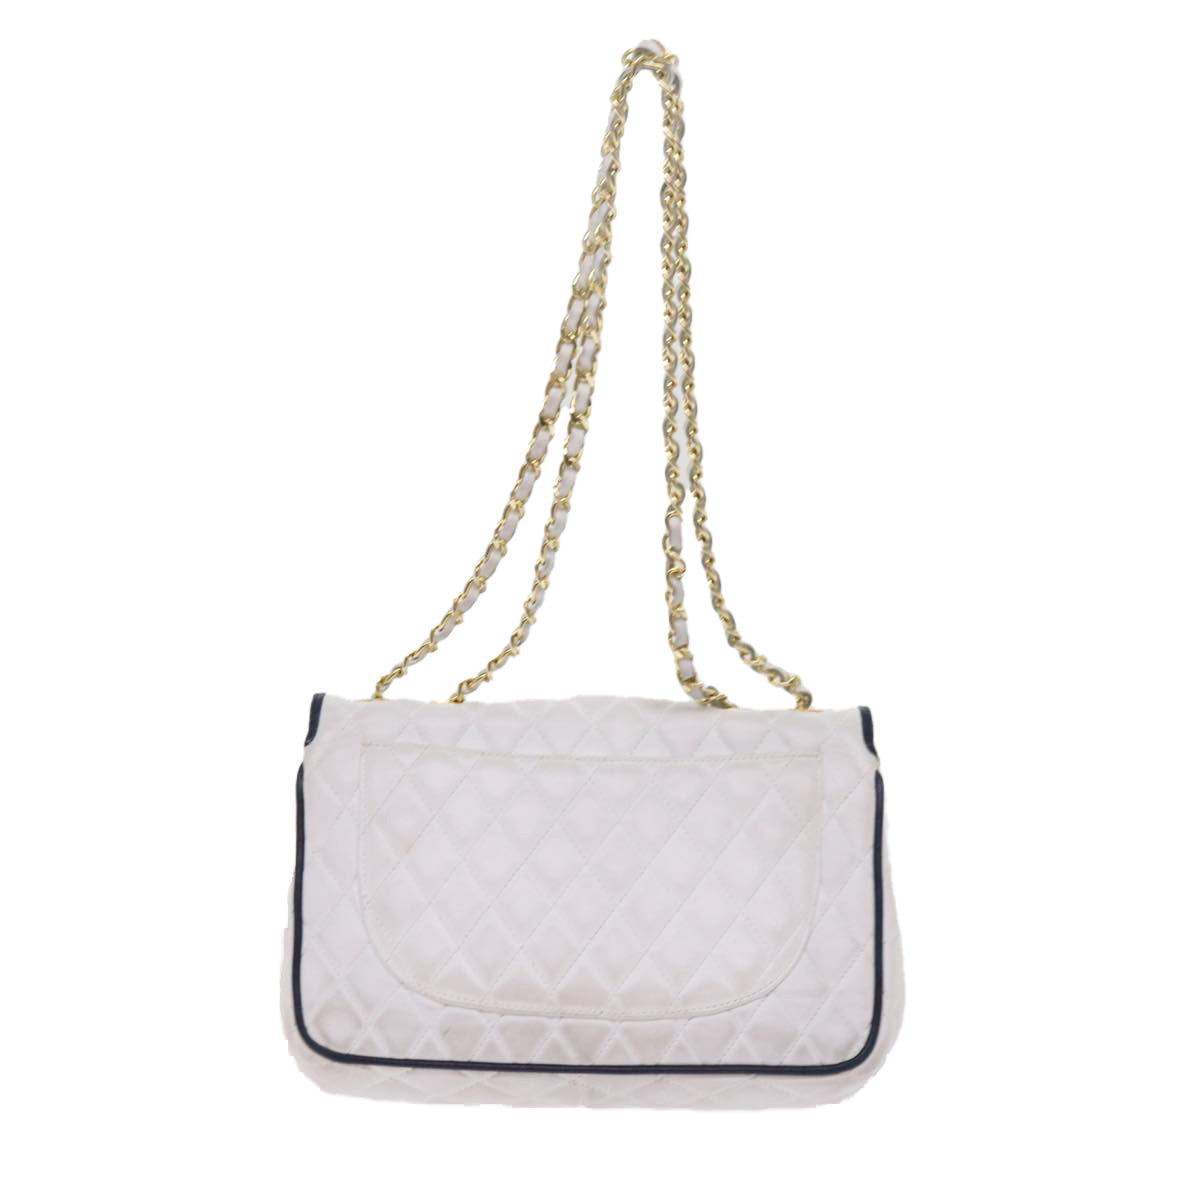 BALLY Chain Shoulder Bag Leather White Auth 62020 - 0